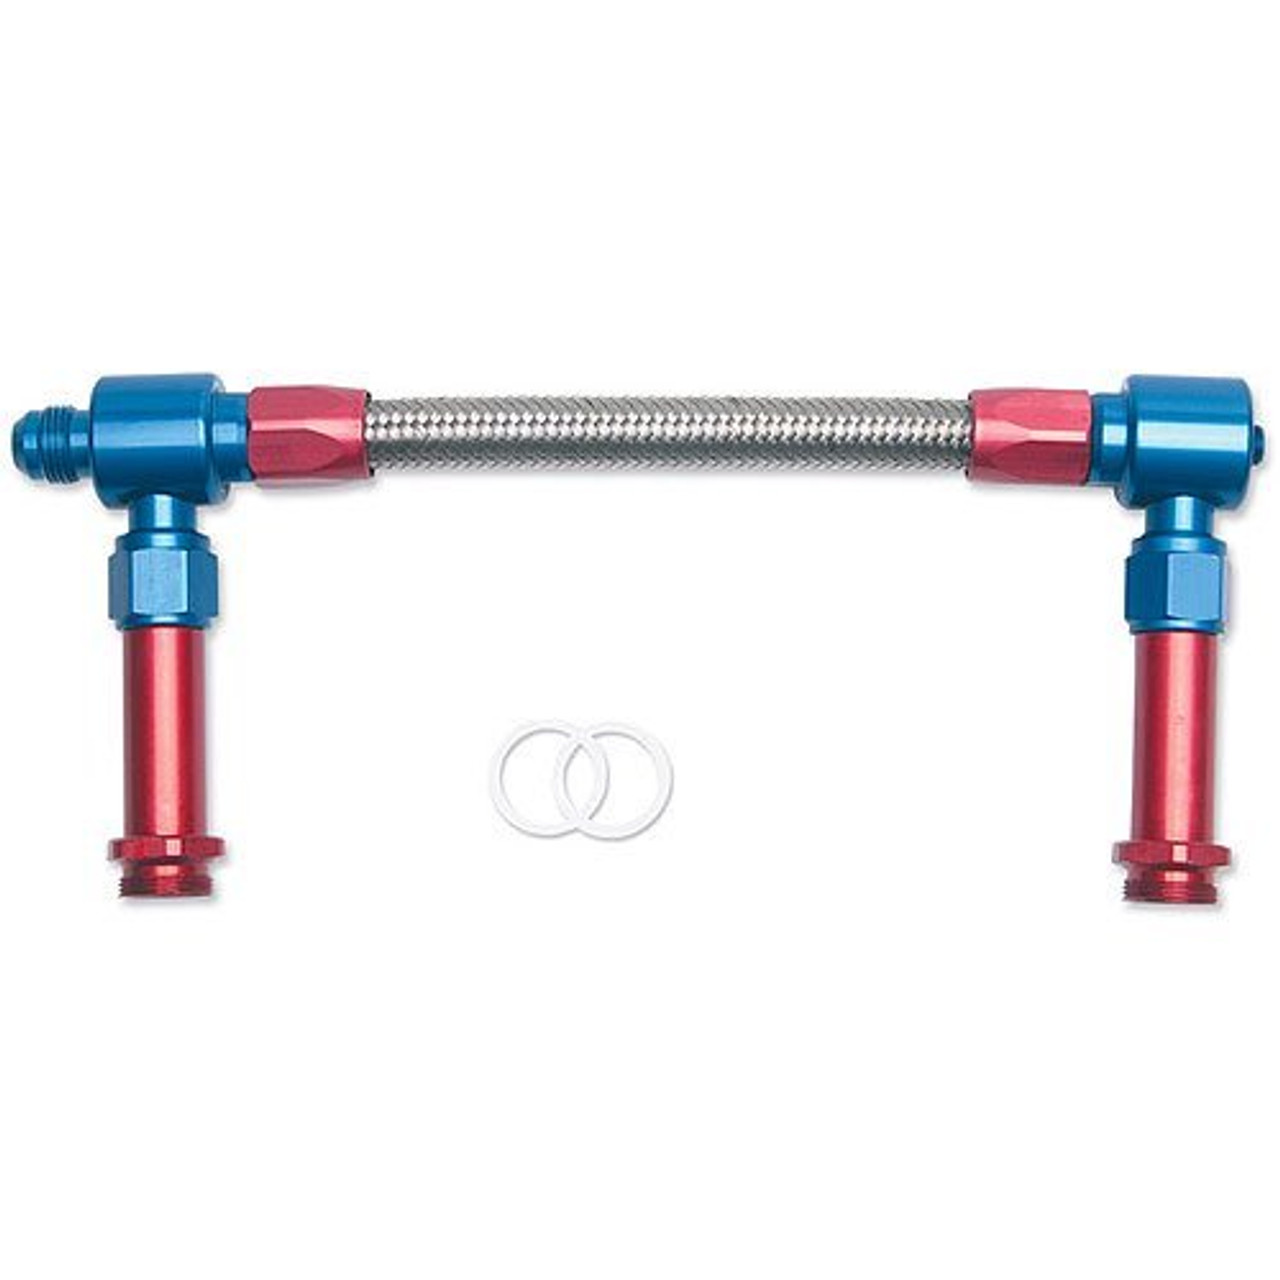 Russell Performance -8 AN to -8 AN ProFlex Holley 4500 Dual Inlet Carb Kit (Red/Blue) - 641140